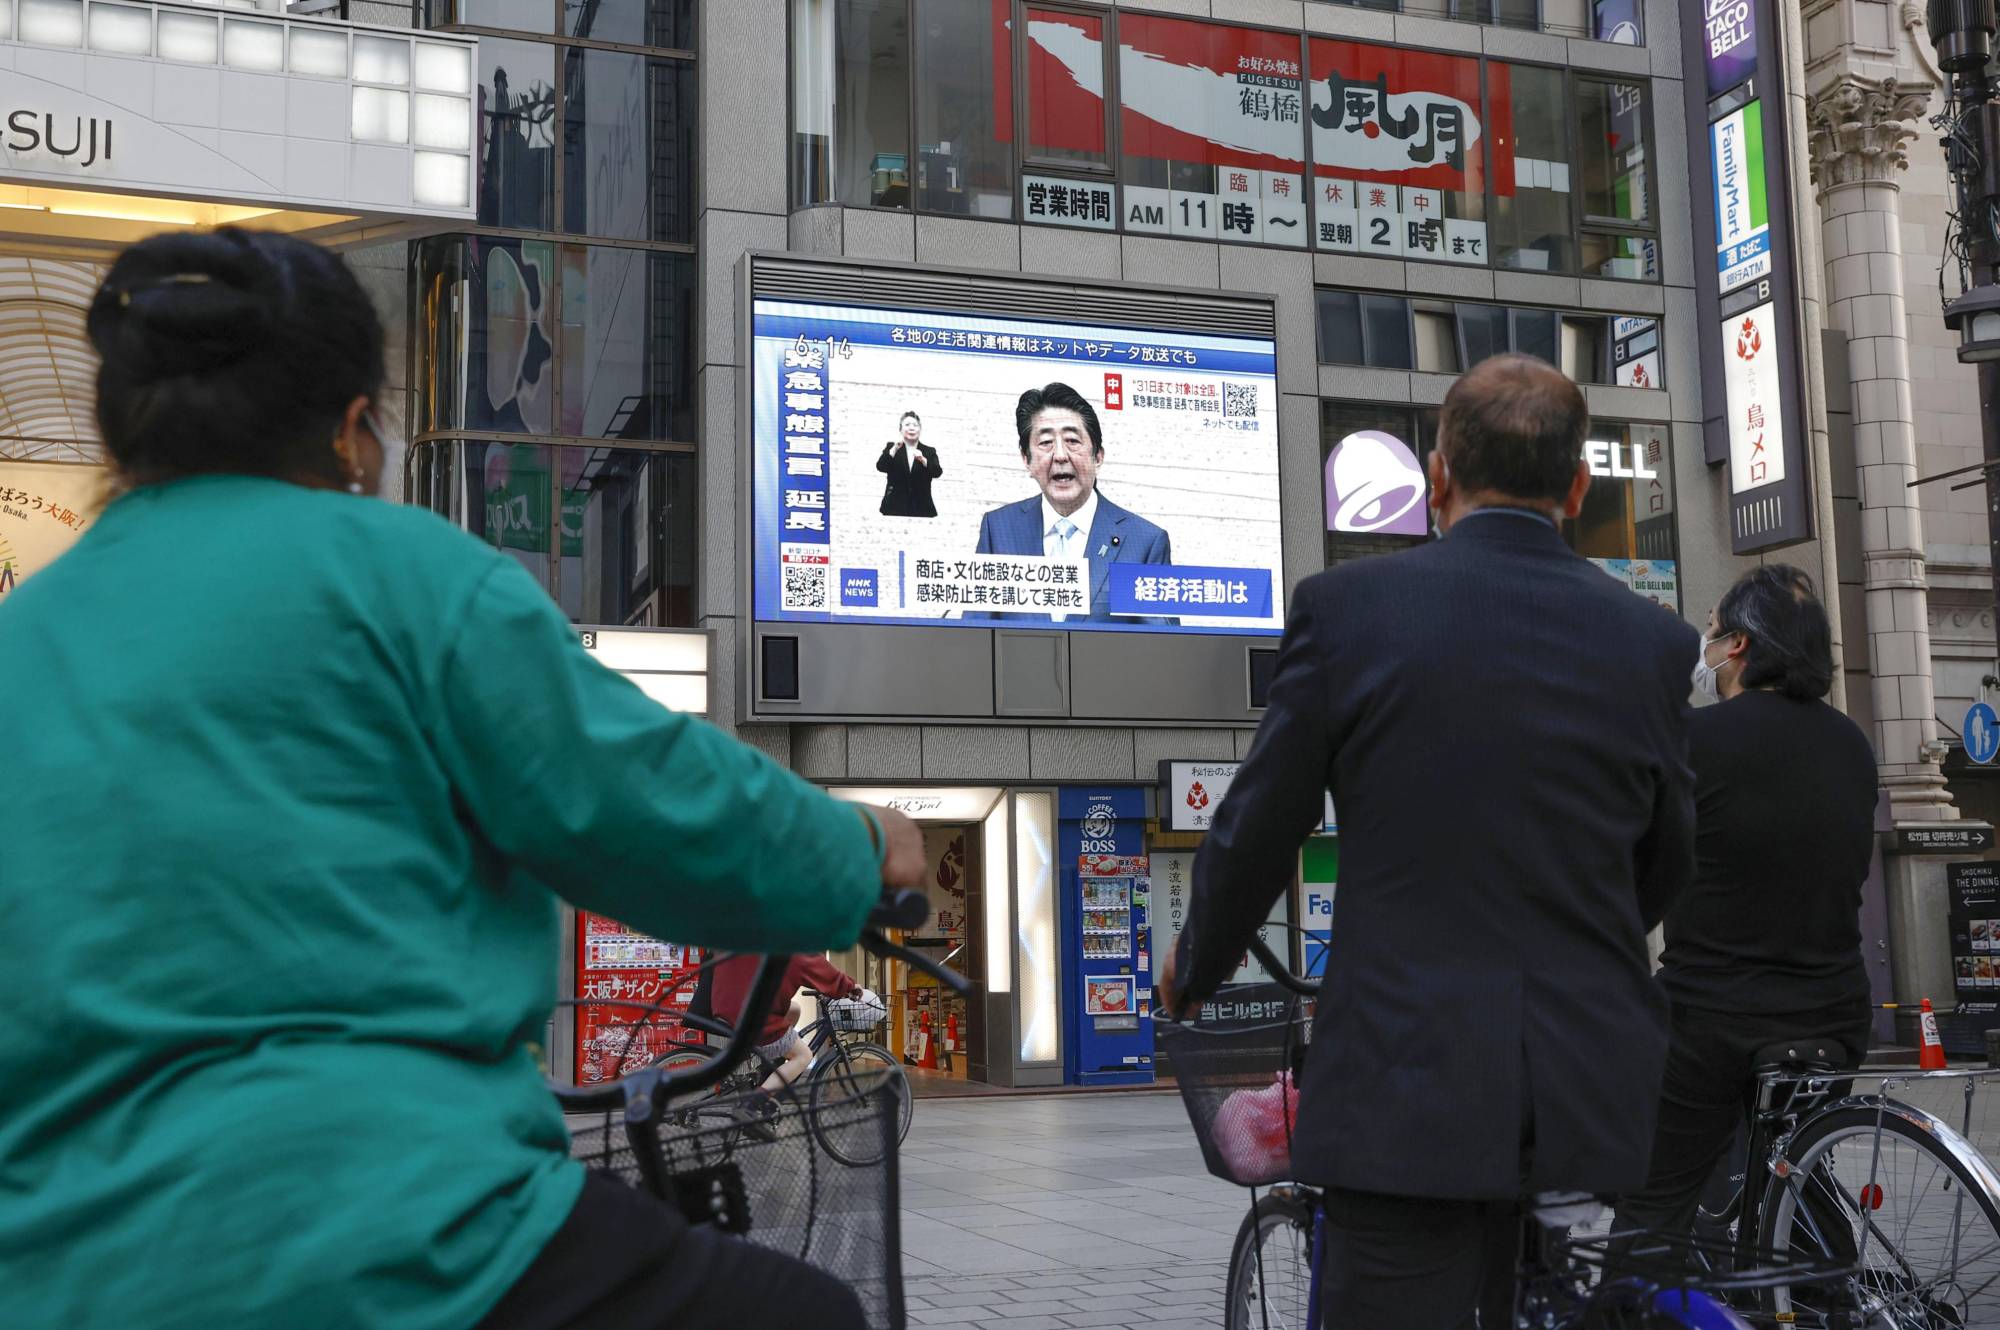 People watch a news conference by Prime Minister Shinzo Abe in which he explained the extension of a nationwide state of emergency over the coronavirus pandemic until the end of the month, in Osaka's Dotonbori district on May 4.  | KYODO